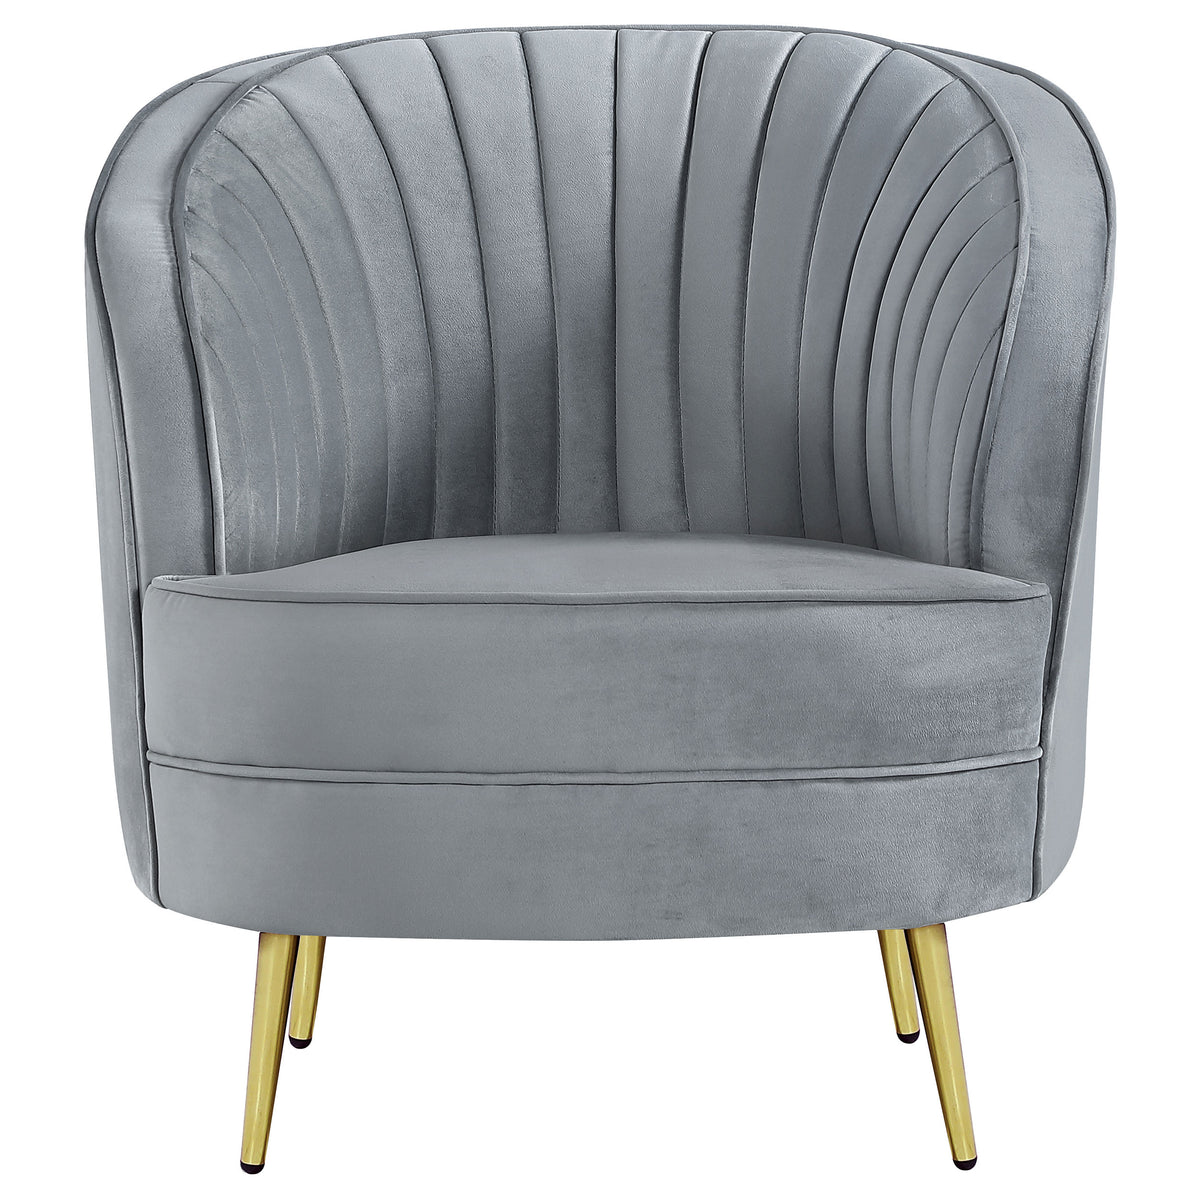 Sophia Upholstered Chair Grey and Gold Sophia Upholstered Chair Grey and Gold Half Price Furniture